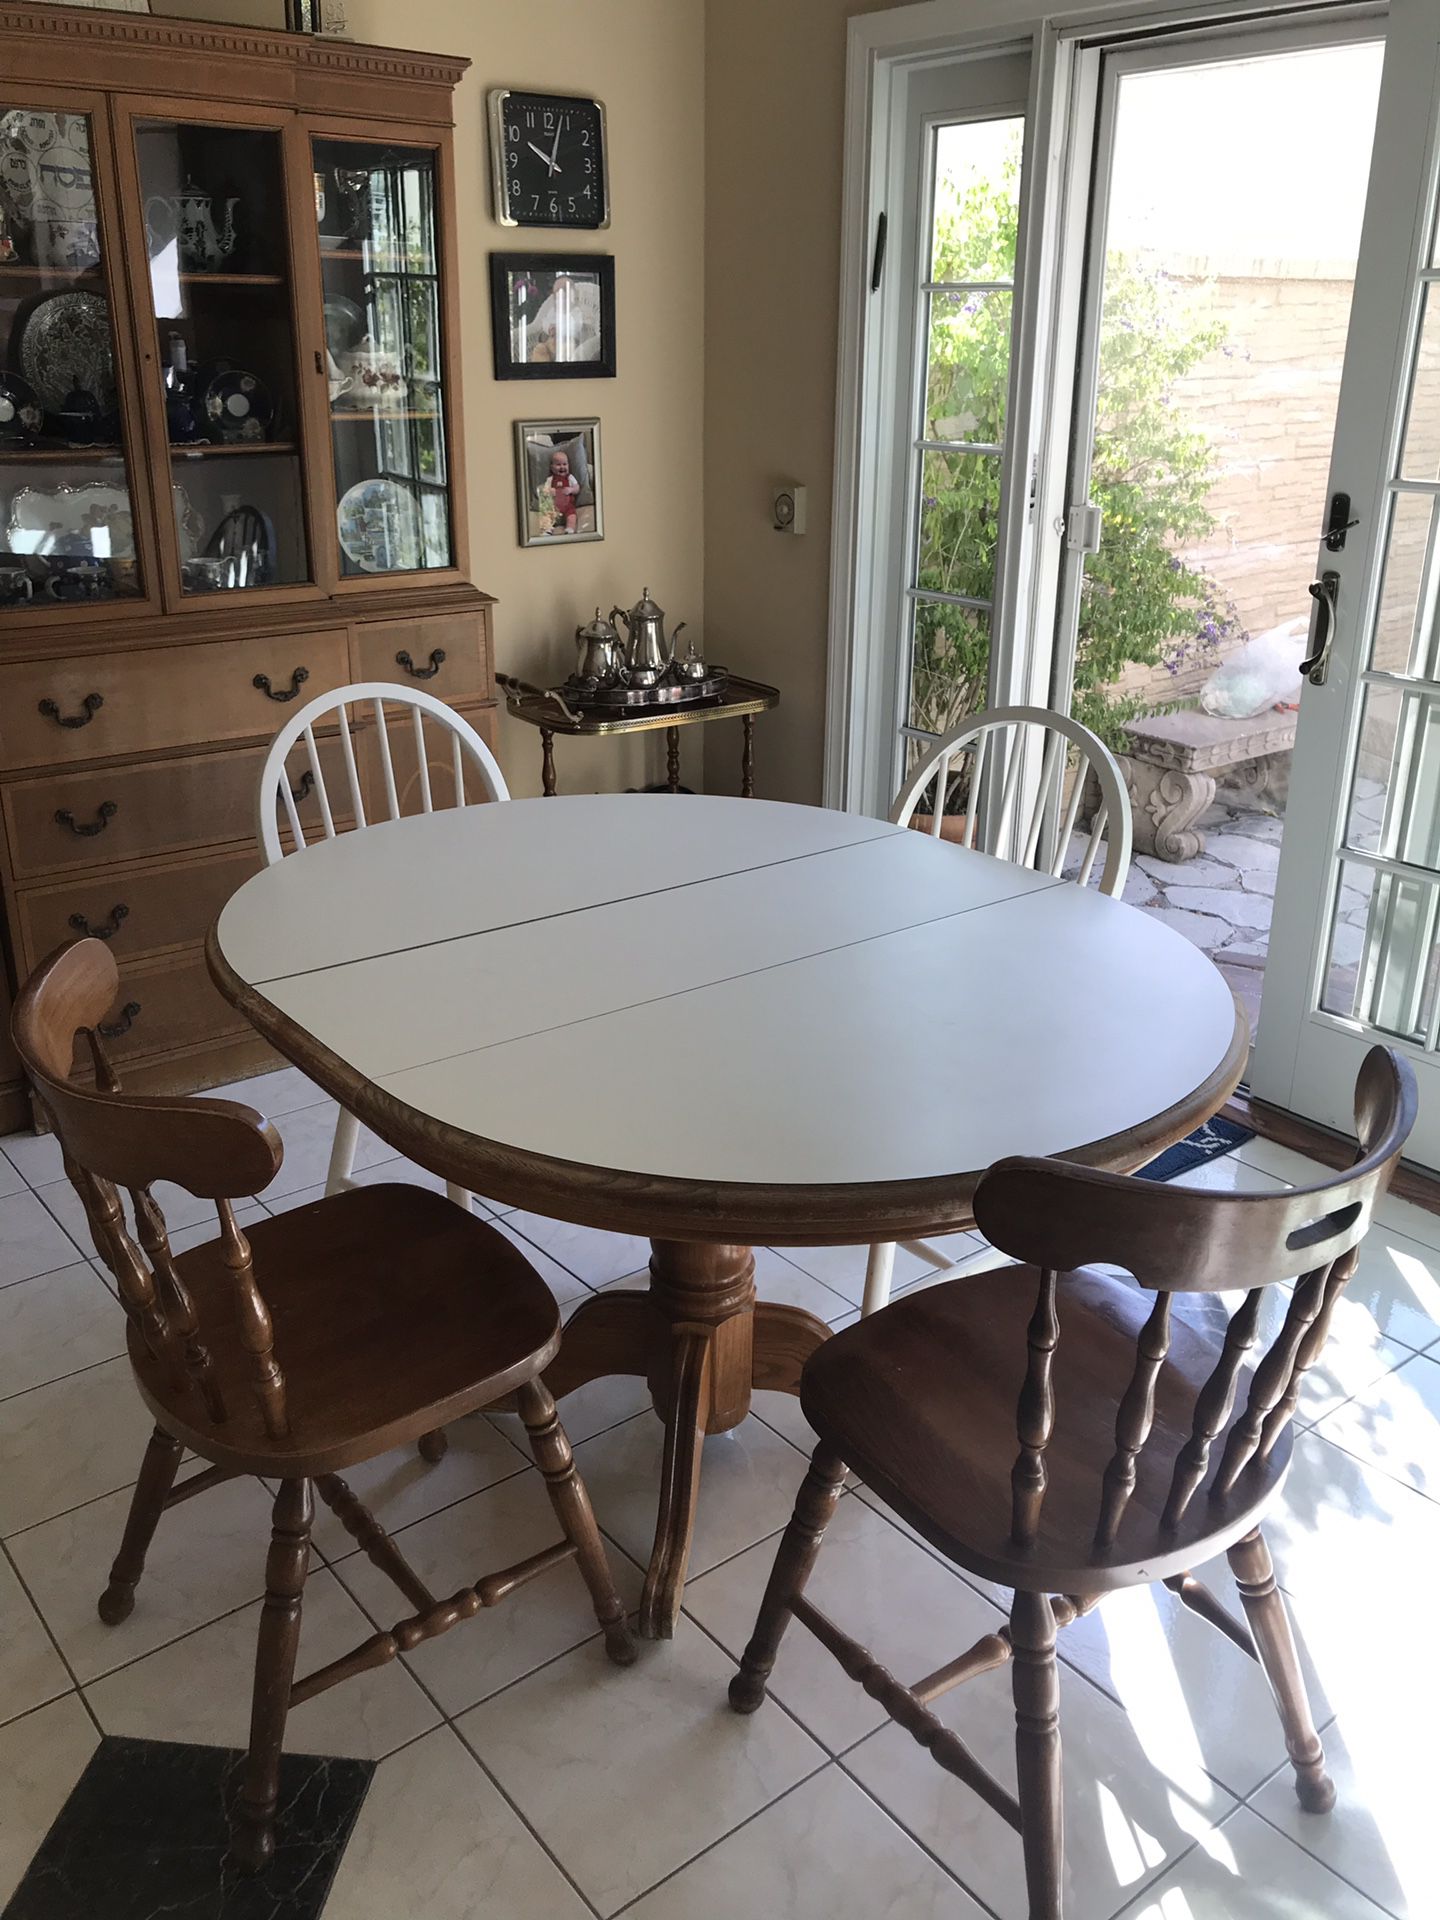 Breakfast table with 4 chairs